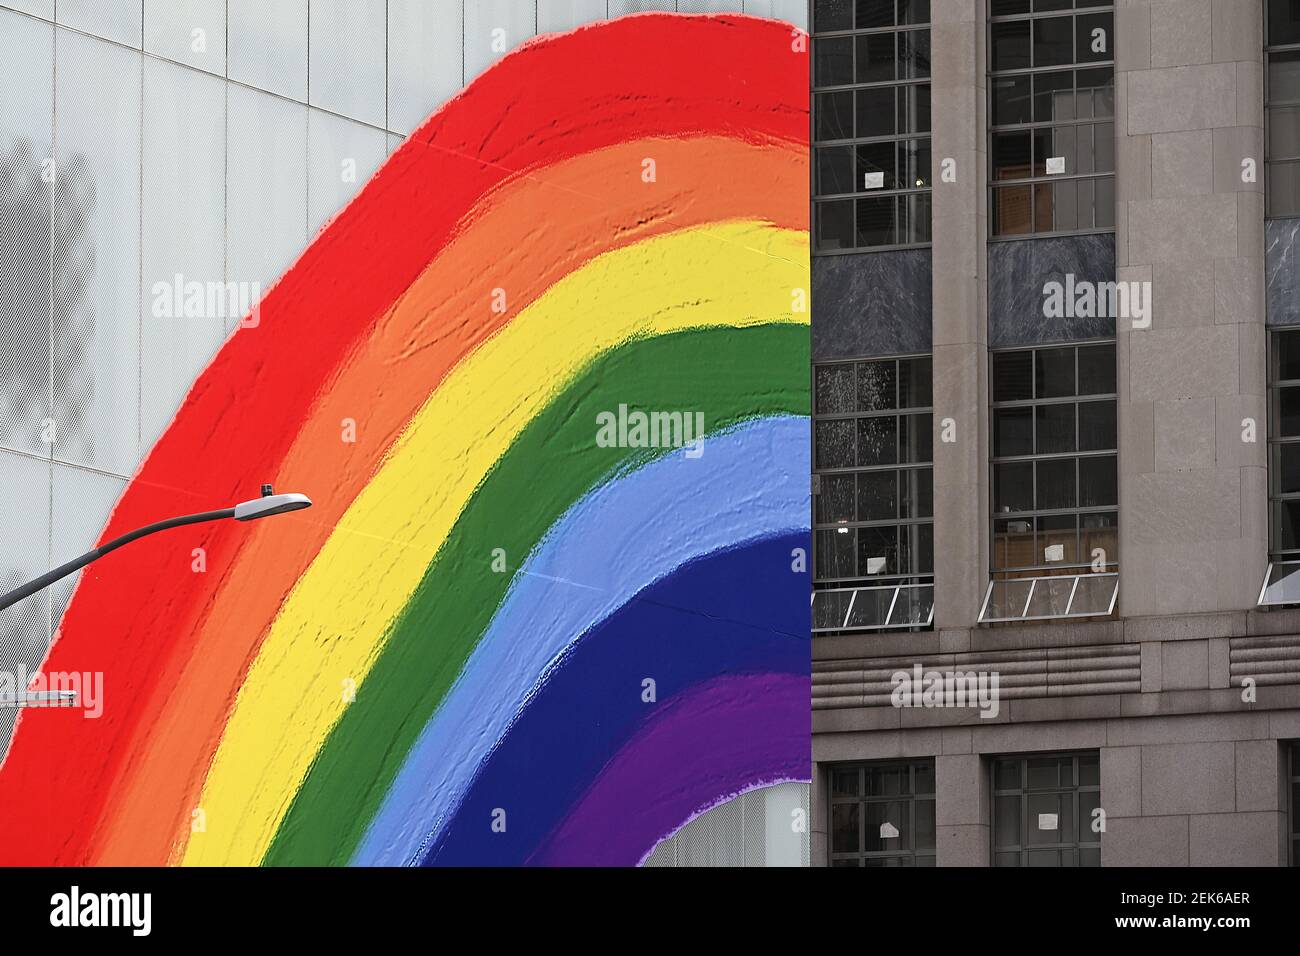 New York City, USA. 18th June, 2020. A reflection in Bergdorf Goodman  window of the newly opened (curbsidee pickup only) Louis Vuitton 5th Ave.  flagship store, decorated with a large rainbow in